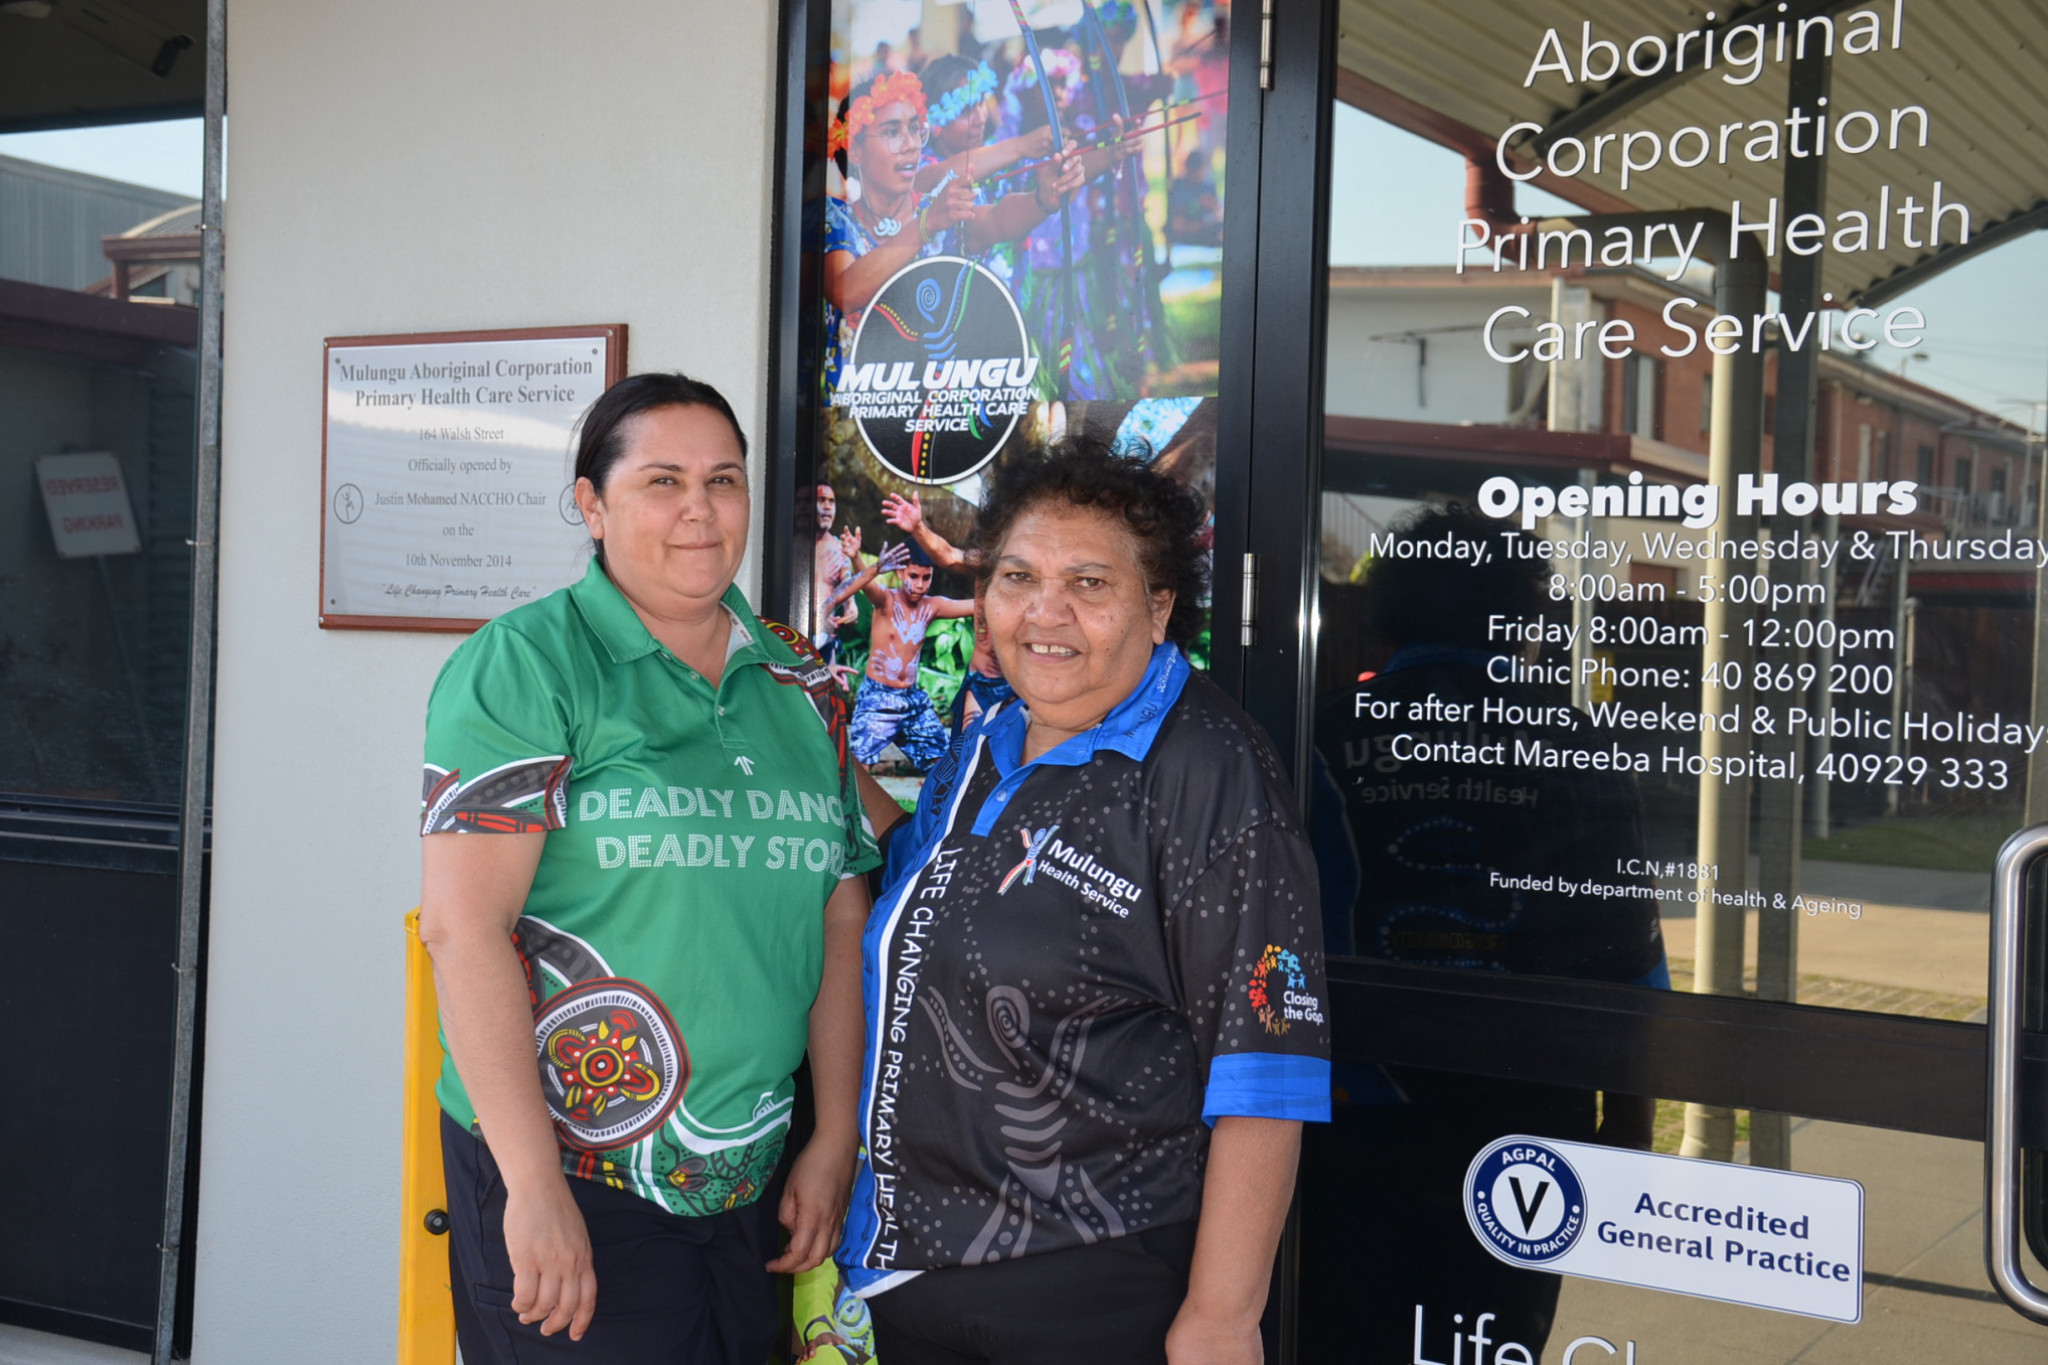 Mulungu Aboriginal Corporation corporate service manager Samanthia Dooley and CEO Gail Wason are excited to celebrate 30 years of providing health services to the local Aboriginal community.